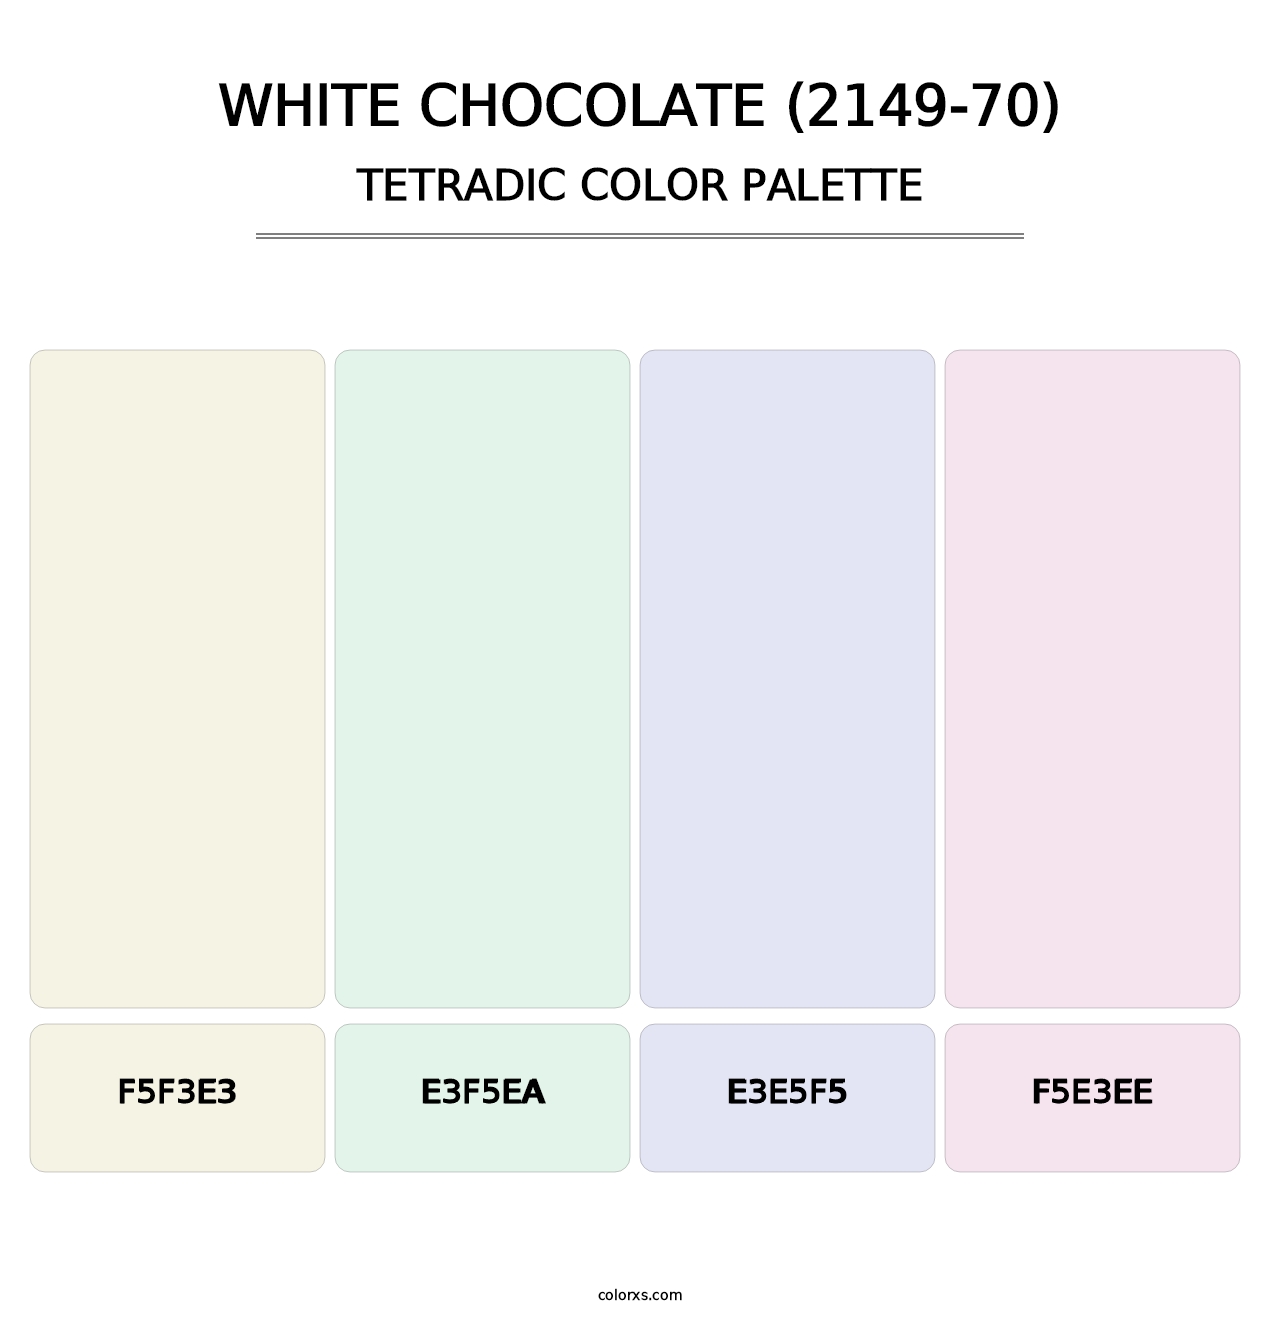 White Chocolate (2149-70) - Tetradic Color Palette